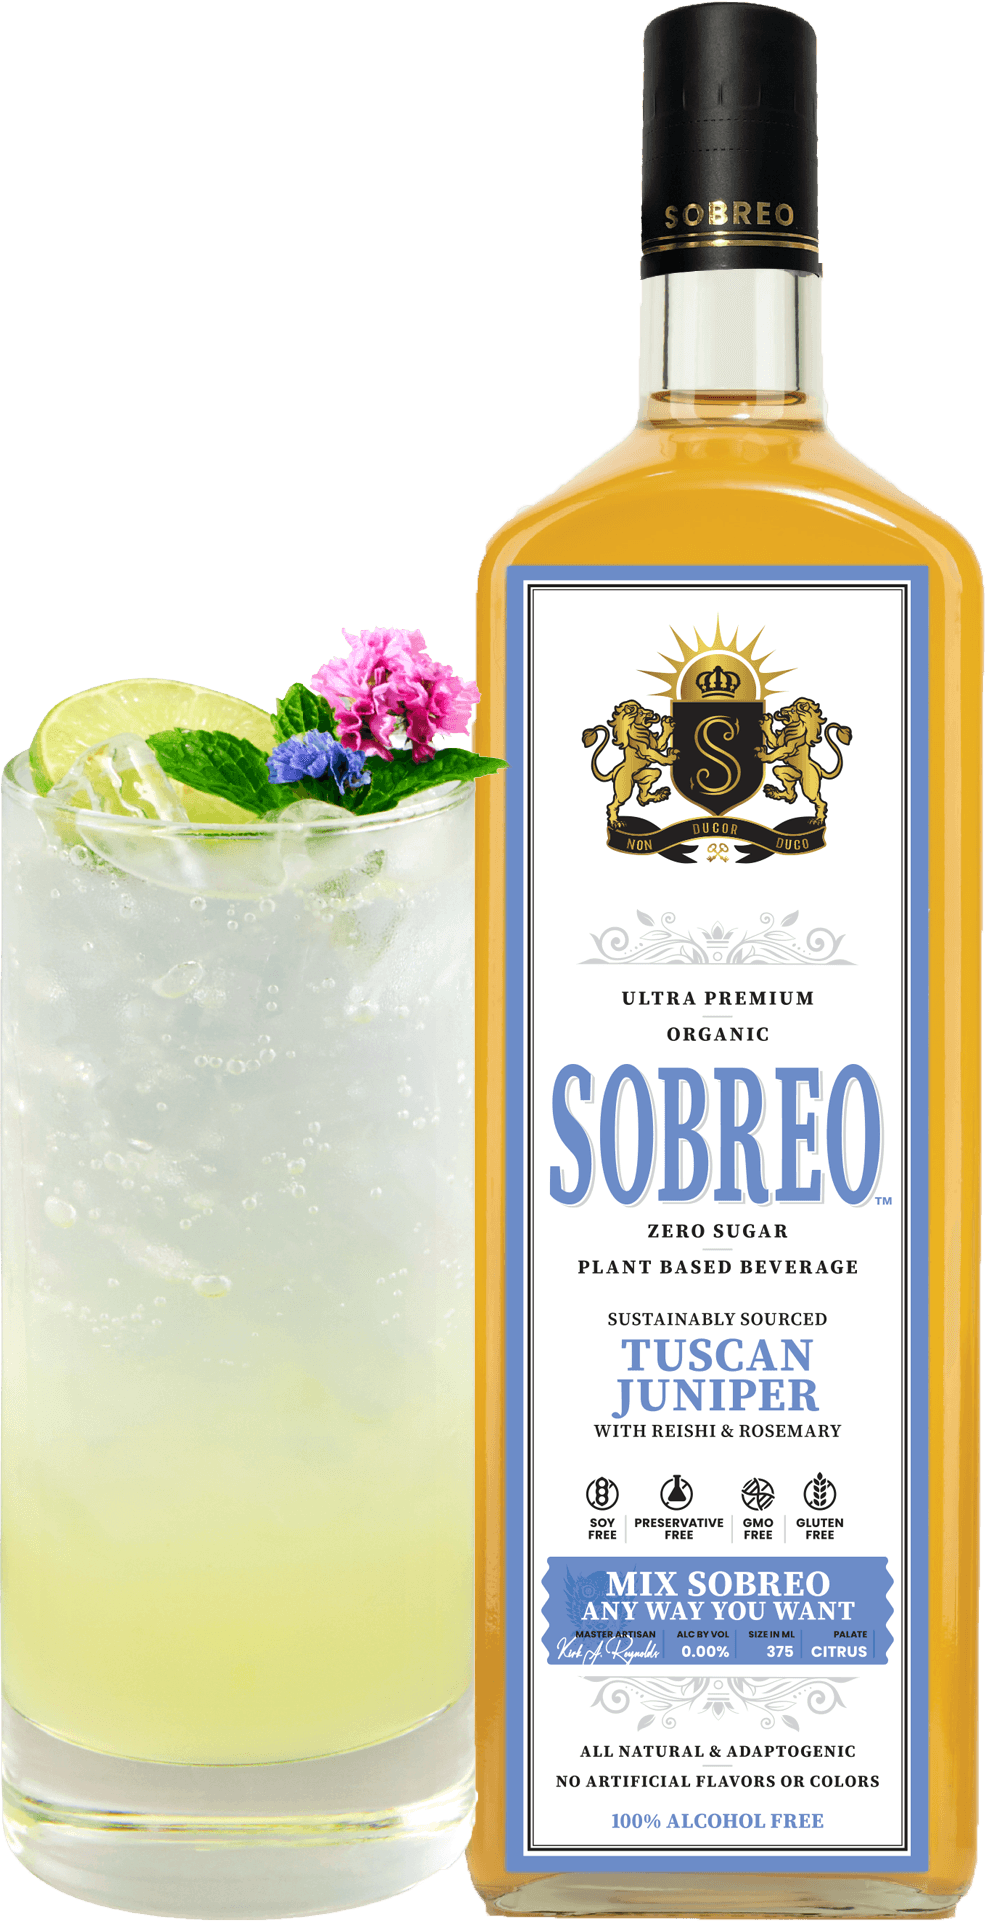 Sobreo non alcoholic cocktail and mocktail mixer in Tuscan Juniper citrus flavor perfect to infuse into a Tom Collins gin recipe